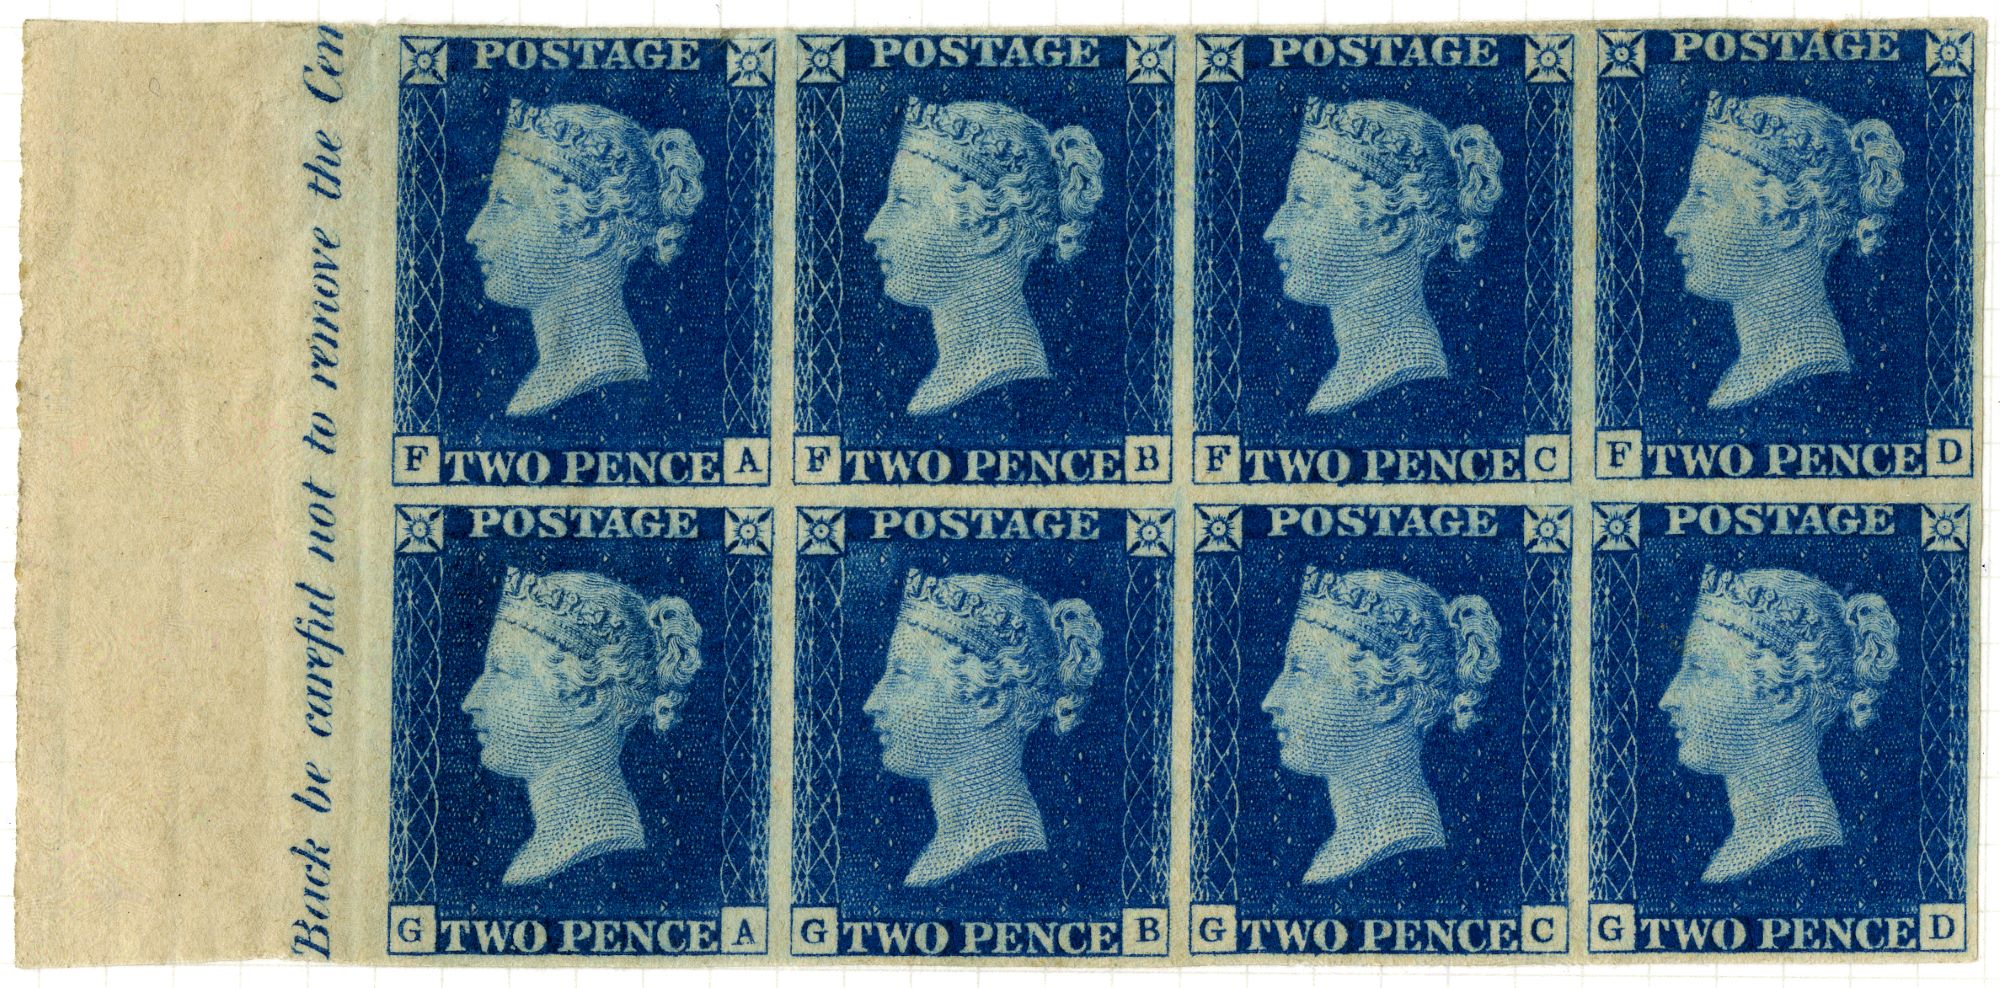 A block of eight dark blue stamps, each with a small portrait of Queen Victoria in the middle and the words 'Postage Two Pence' around this.